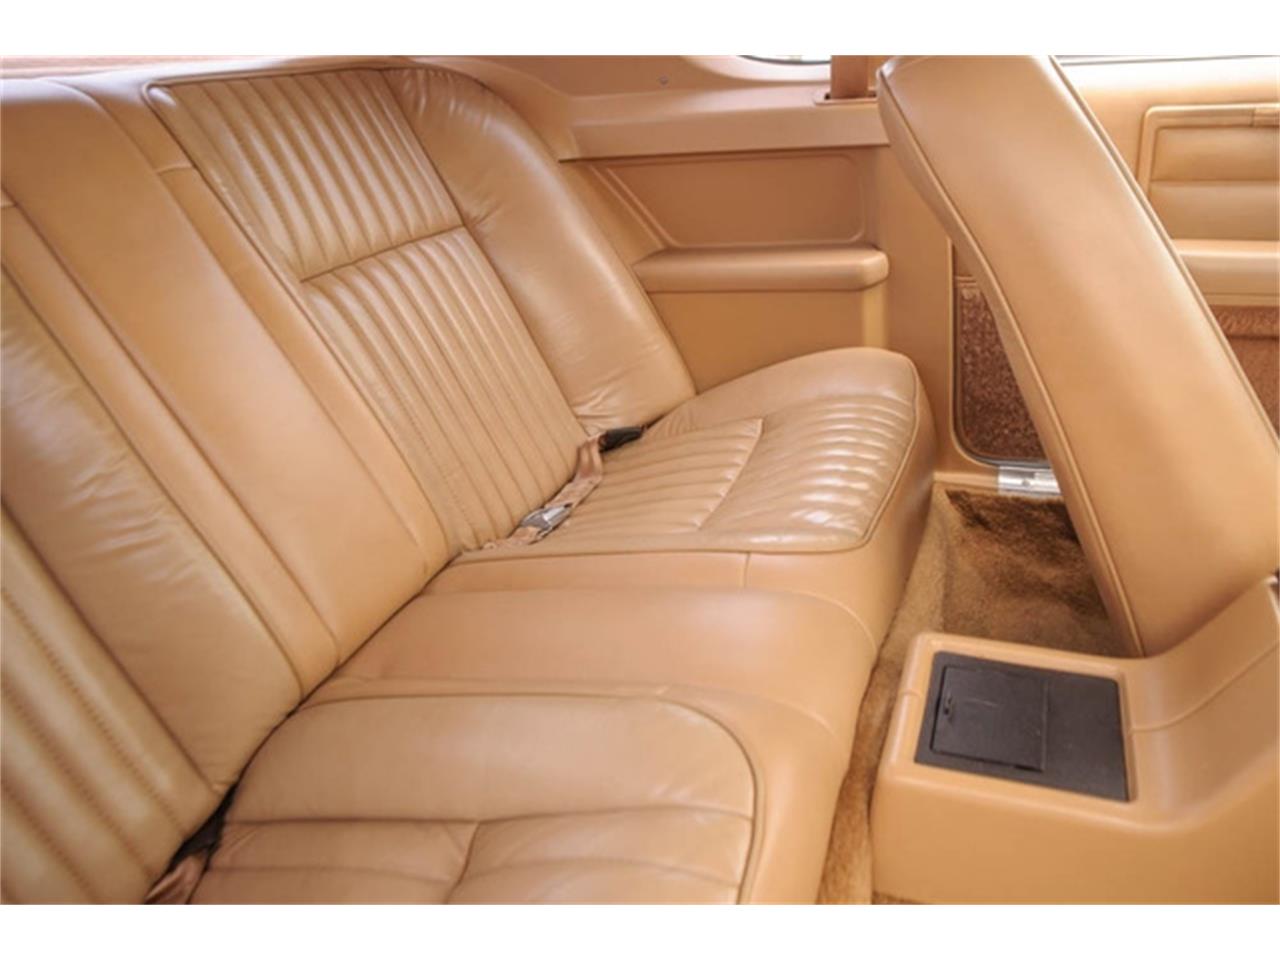 1984 Tiffany Classic for sale in Saint Louis, MO – photo 91